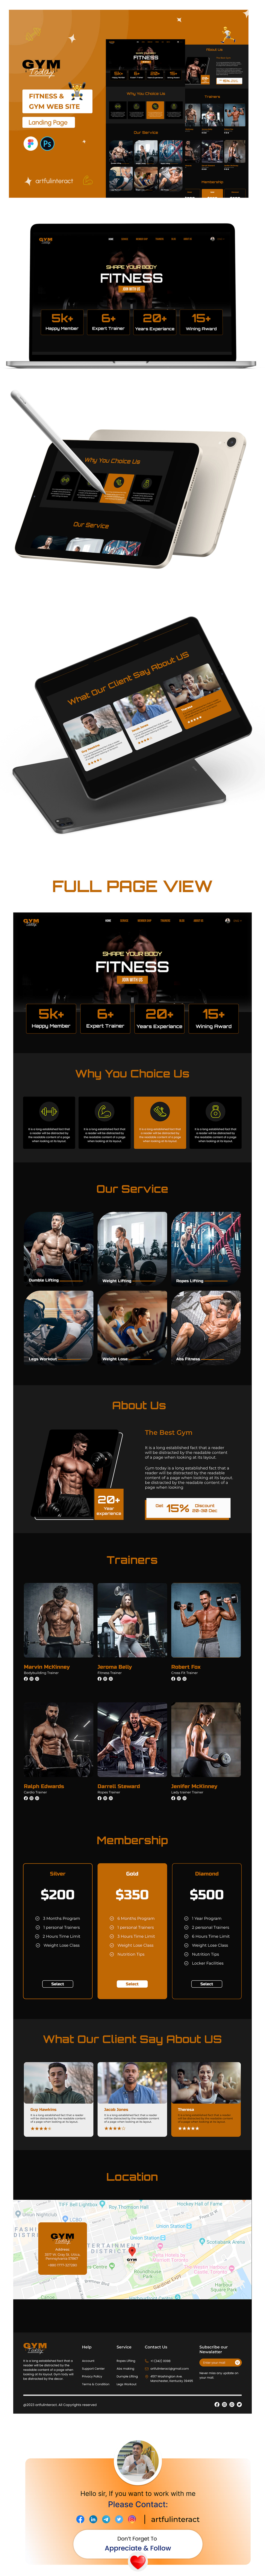 Fitness, Gym & body building web landing page design